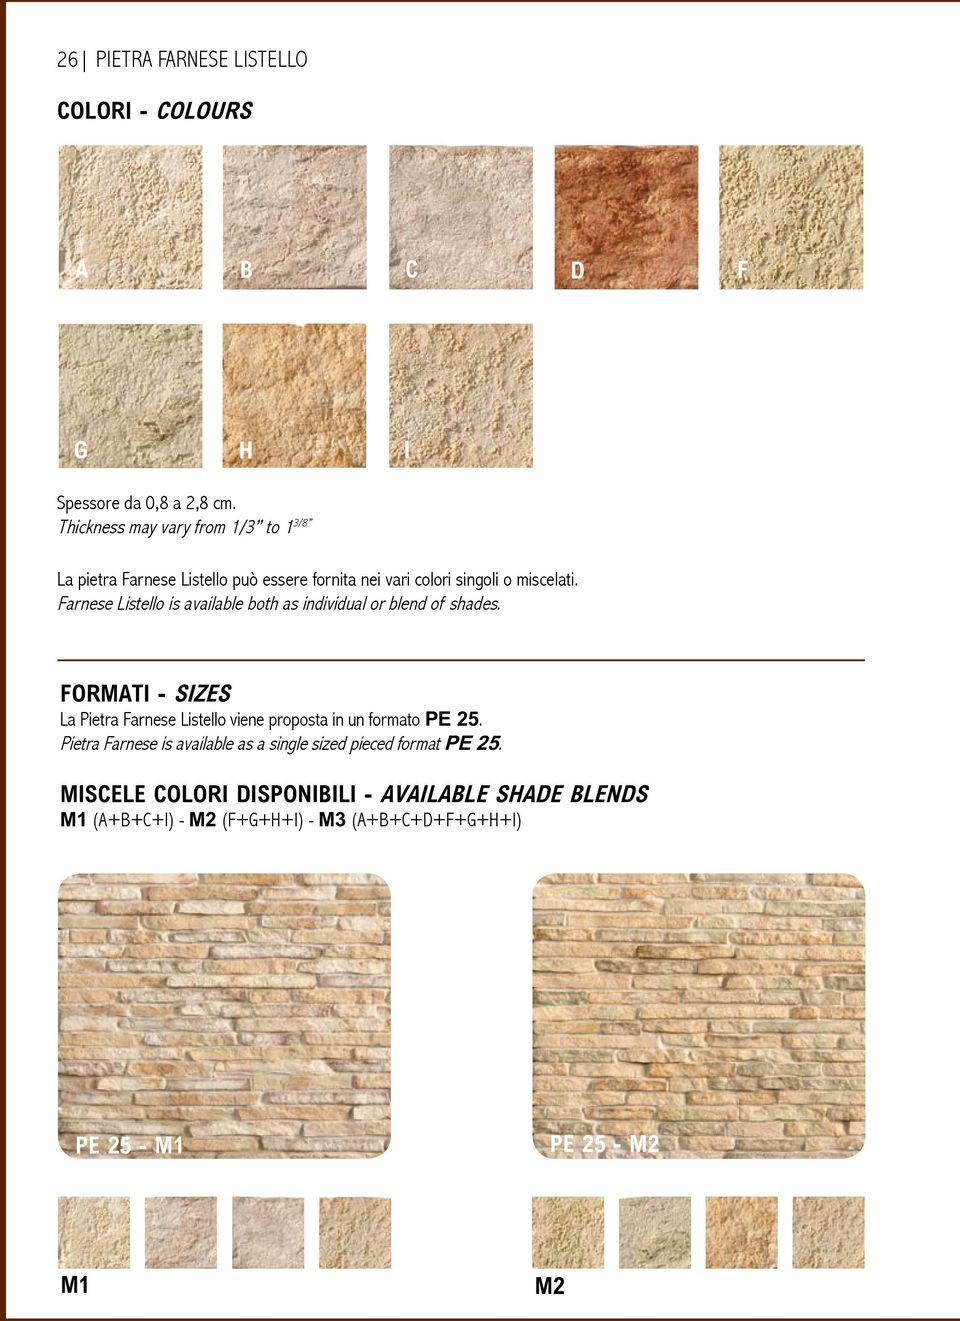 Farnese Listello is available both as individual or blend of shades.